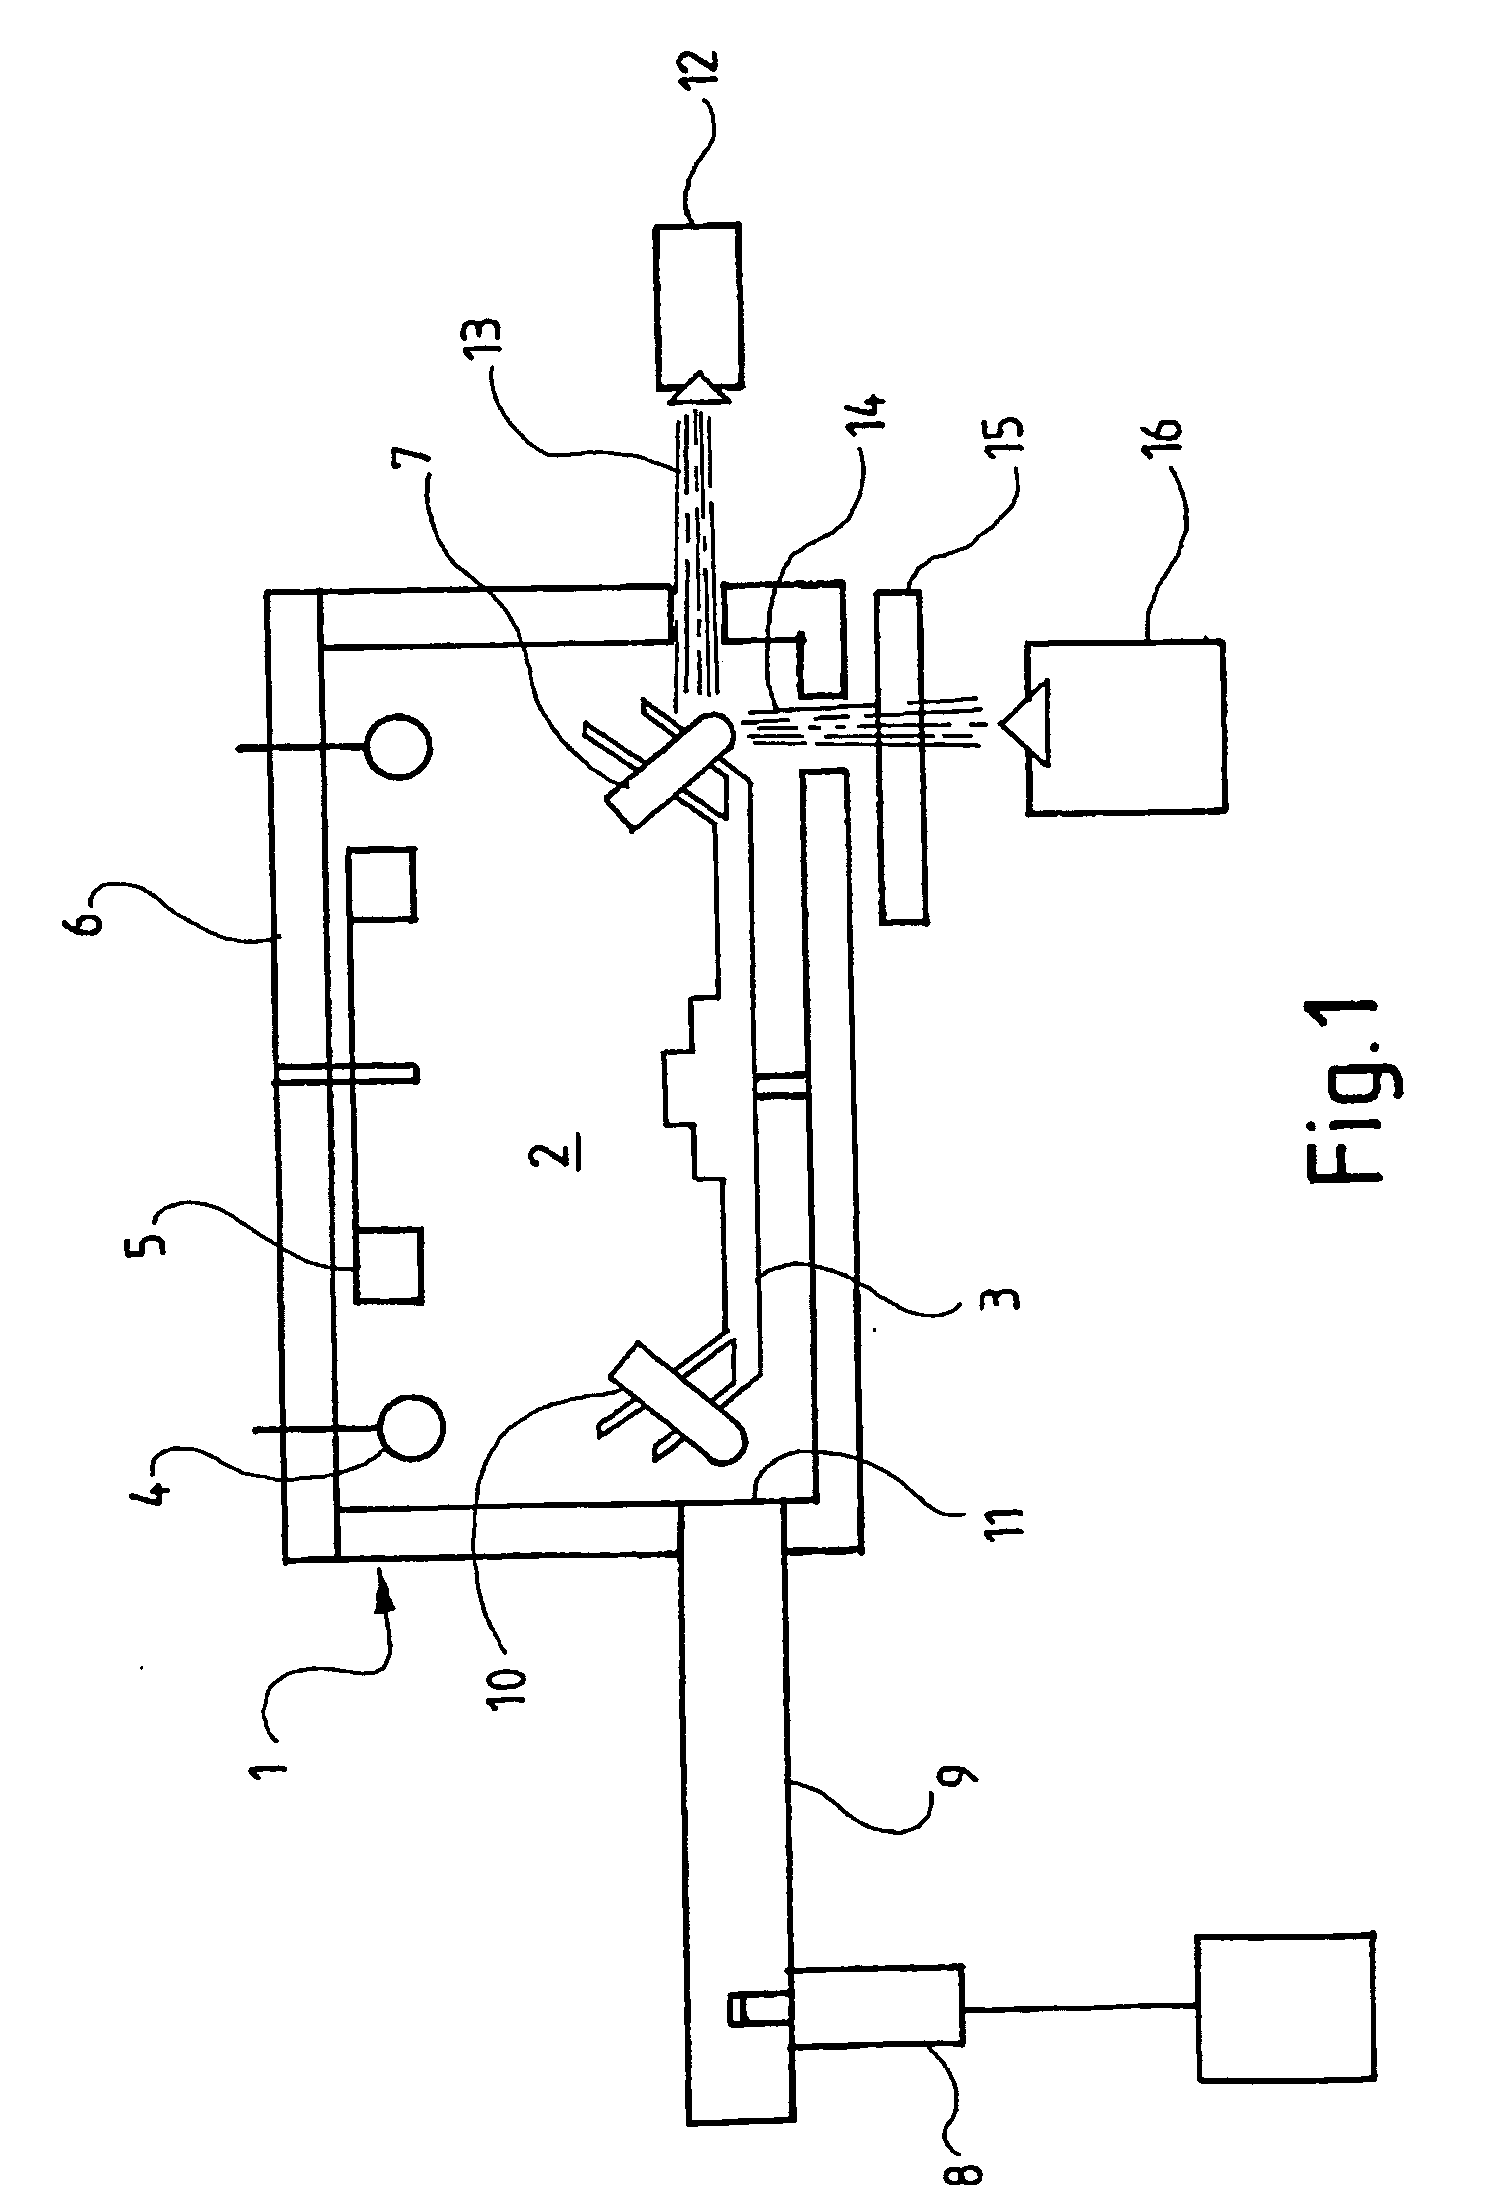 Device for the amplification of dna, comprising a microwave energy source